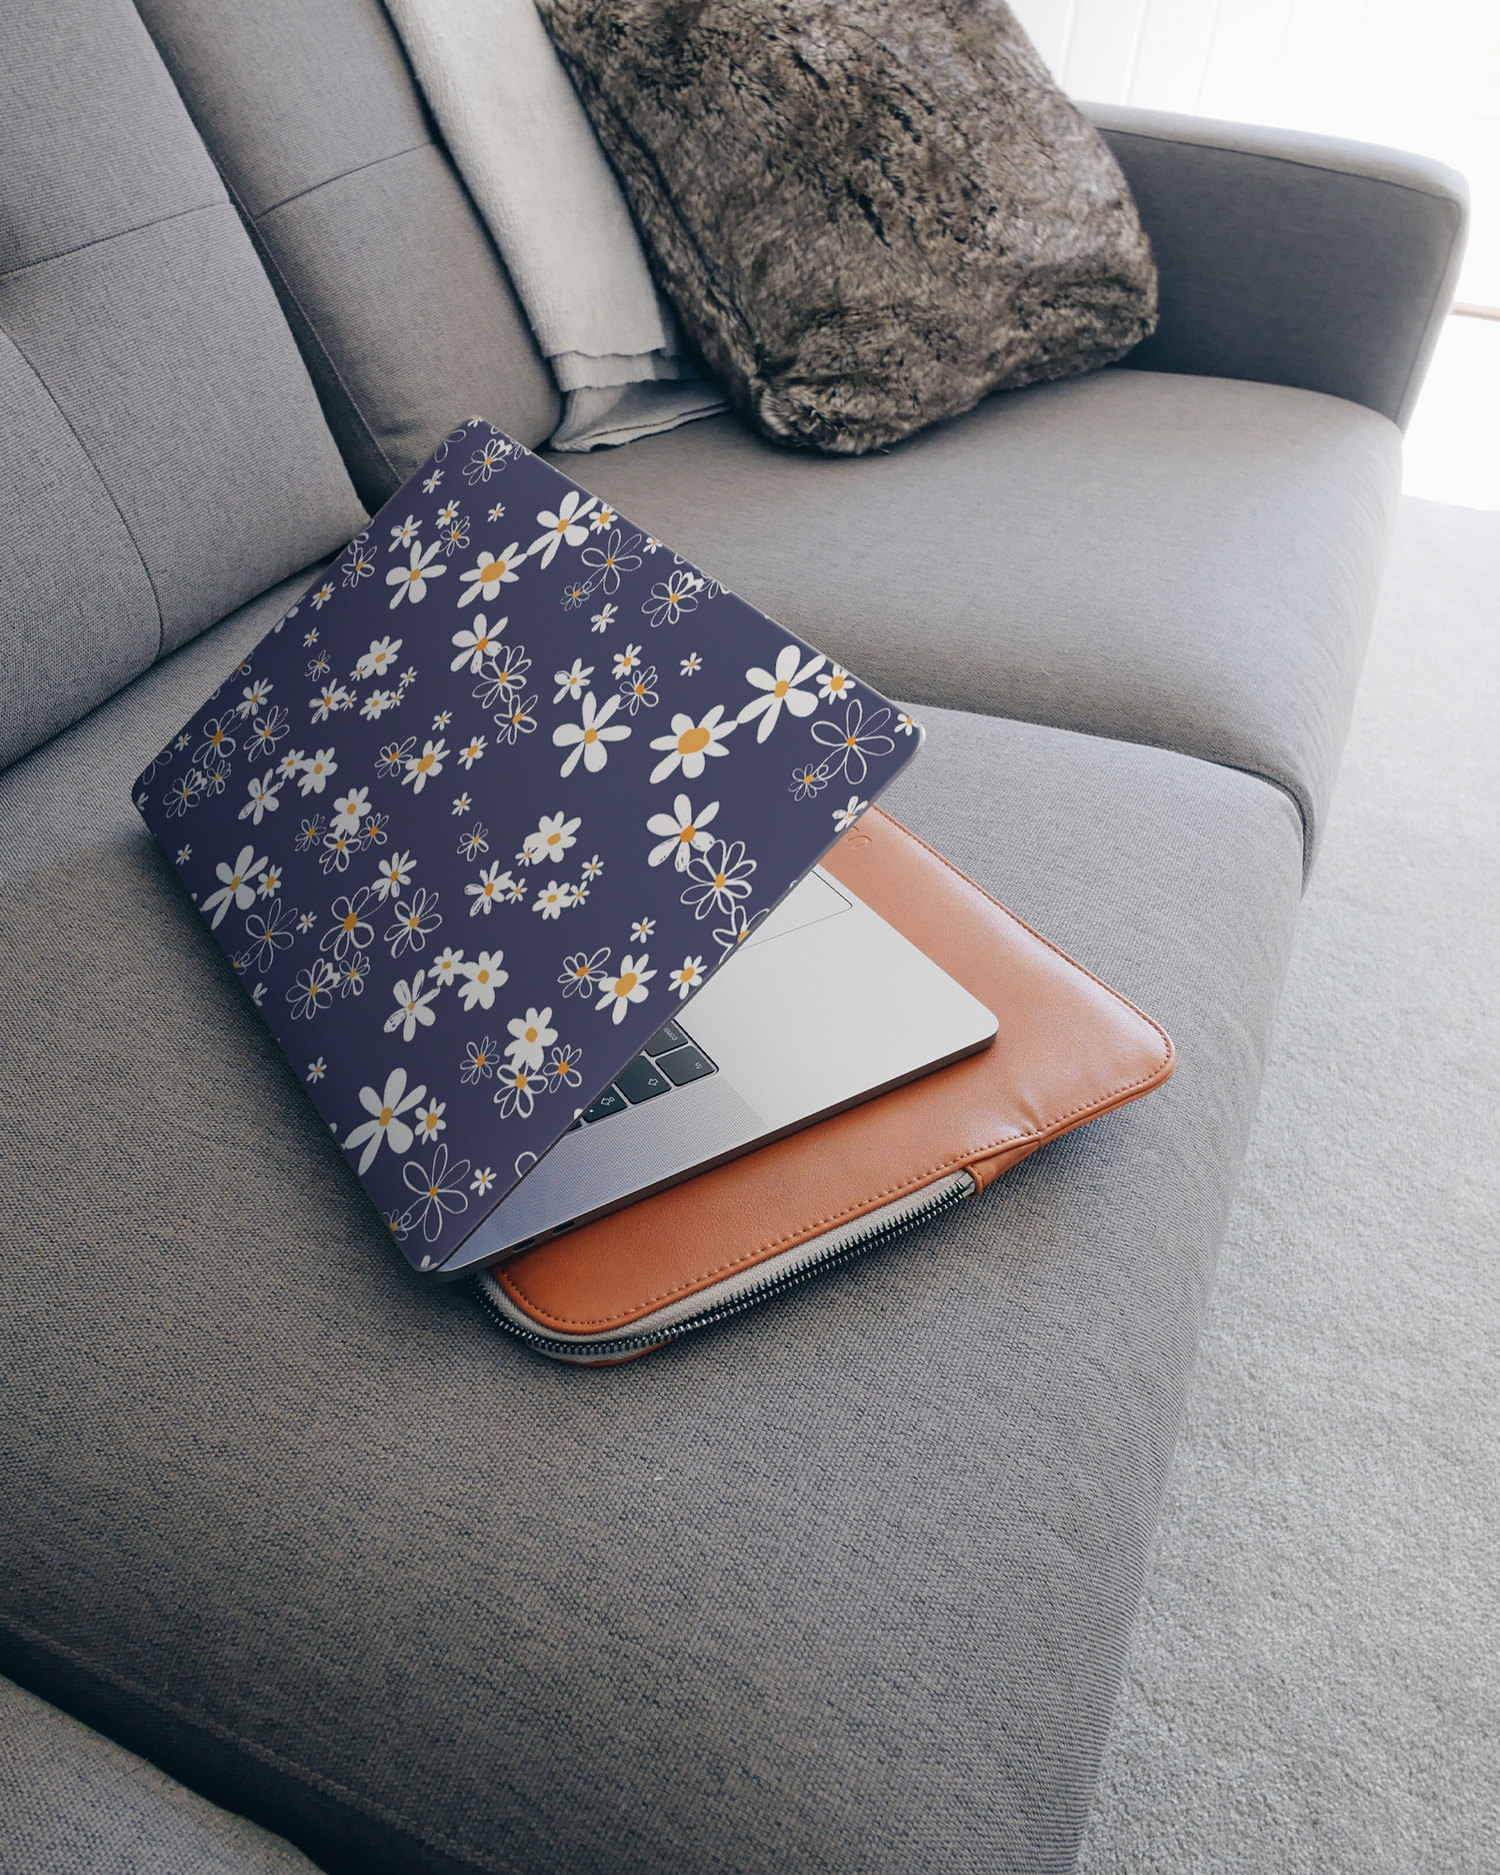 Navy Daisies Laptop Skin for 15 inch Apple MacBooks on a couch